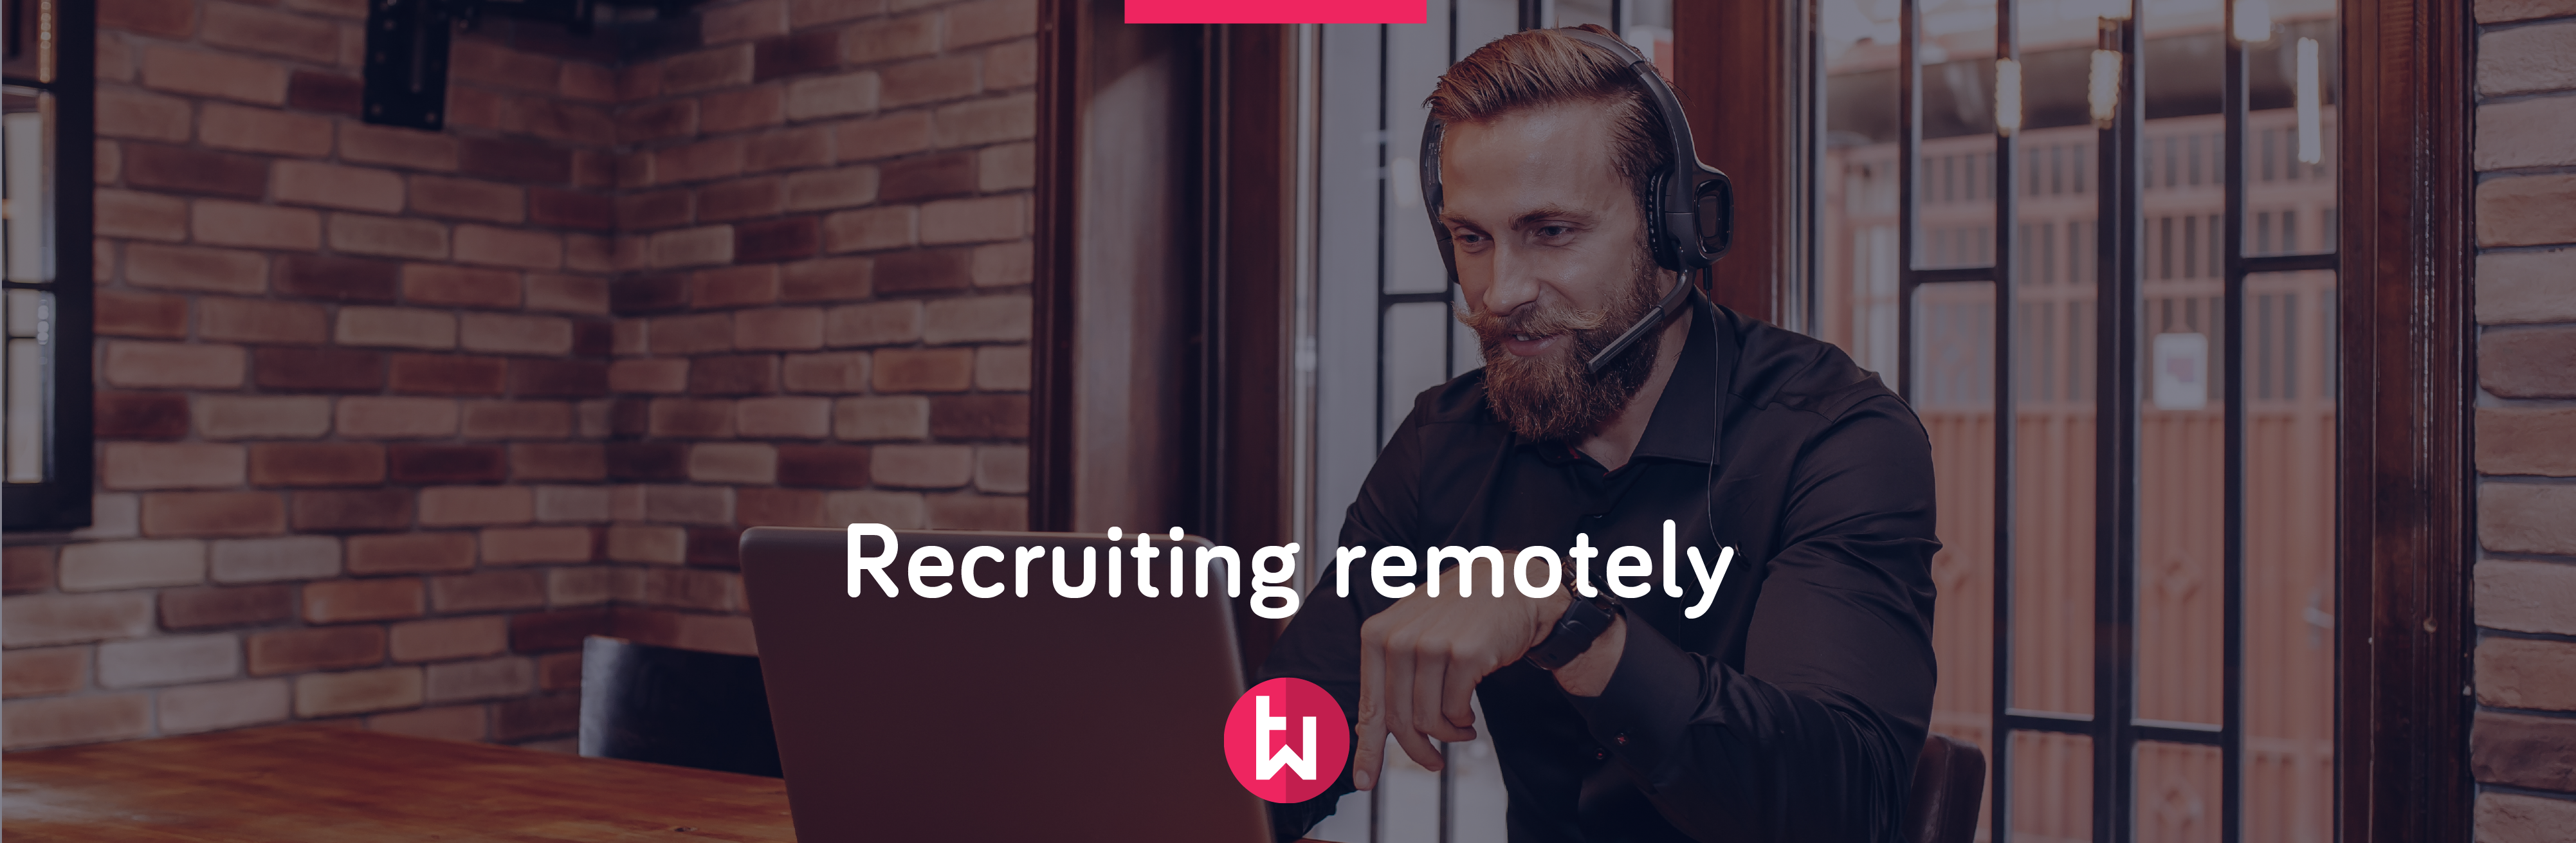 recruiting remotely